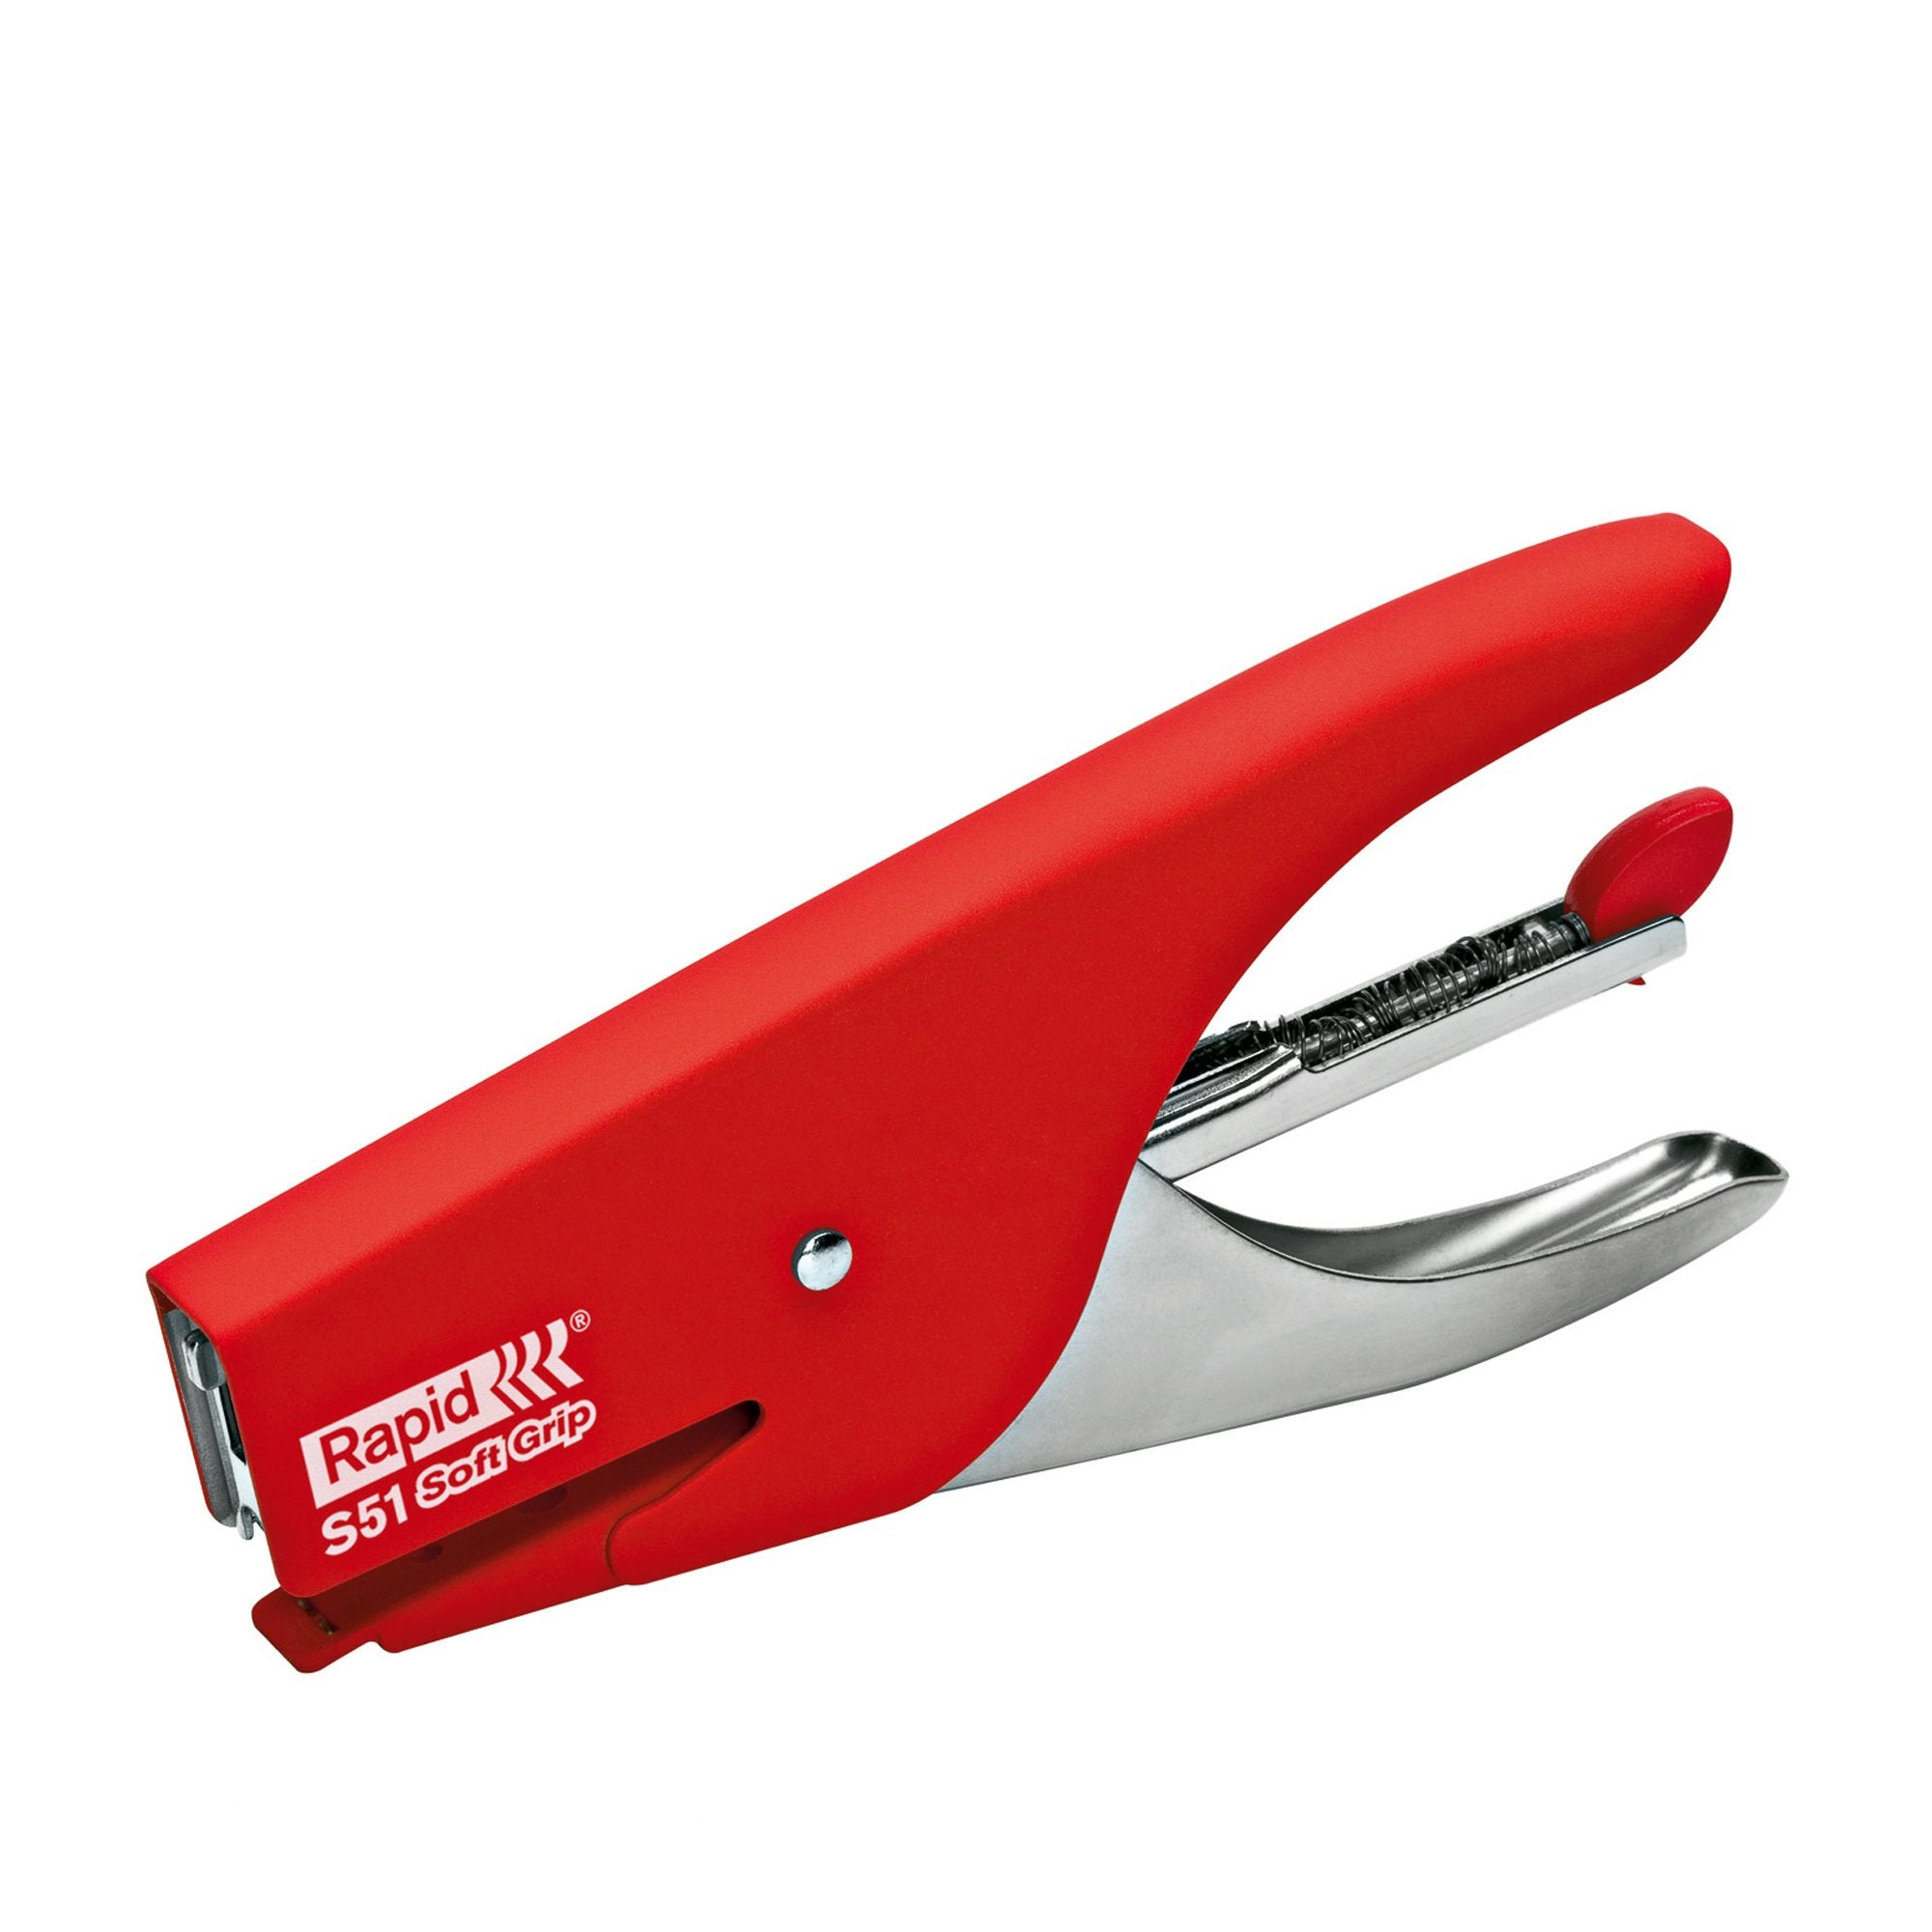 rapid-cucitrice-pinza-s51-soft-grip-rosso